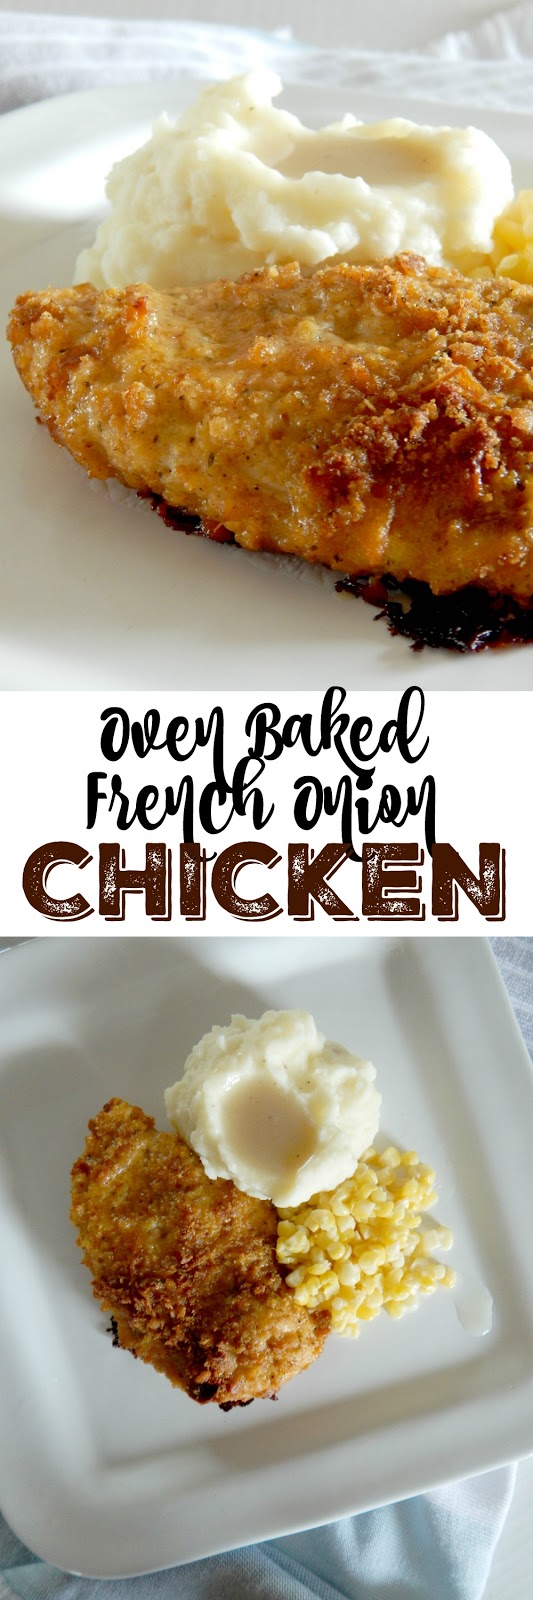 Oven Baked French Onion Chicken...just like fried chicken but without the mess!  Crispy, juicy and flavorful...goes perfectly with homemade mashed potatoes on the side. (sweetandsavoryfood.com)